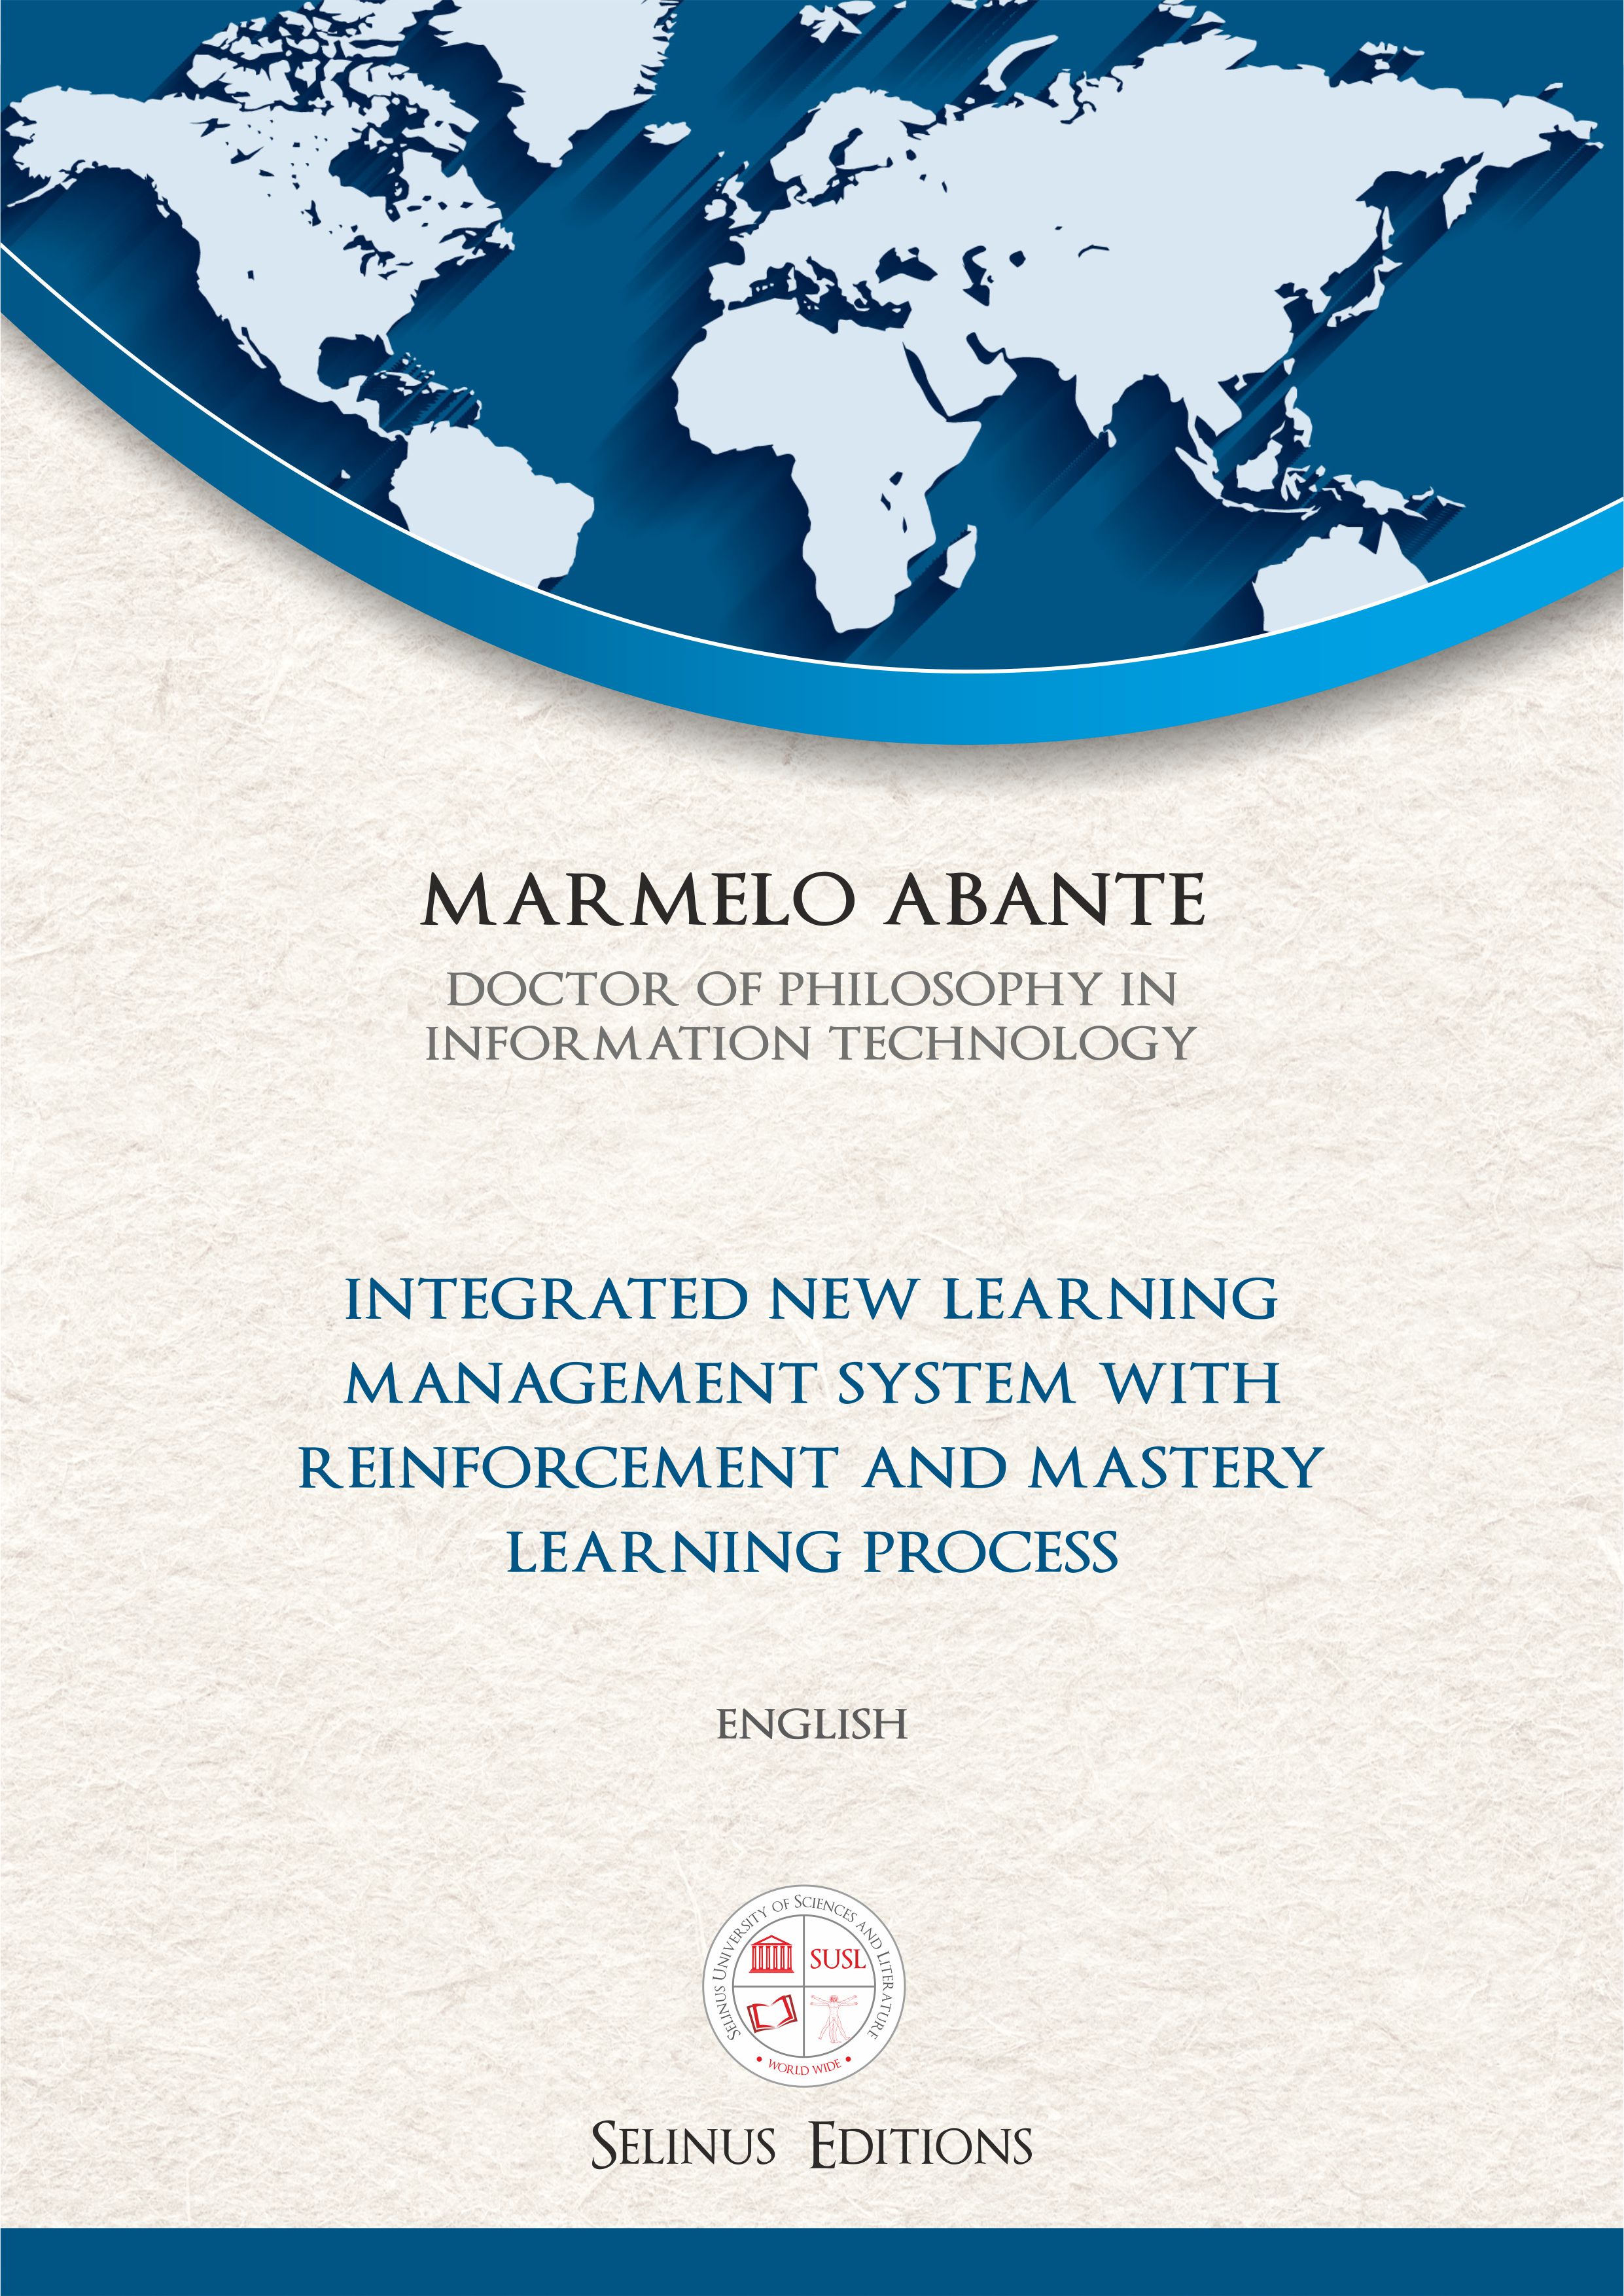 Thesis Marmelo Abante